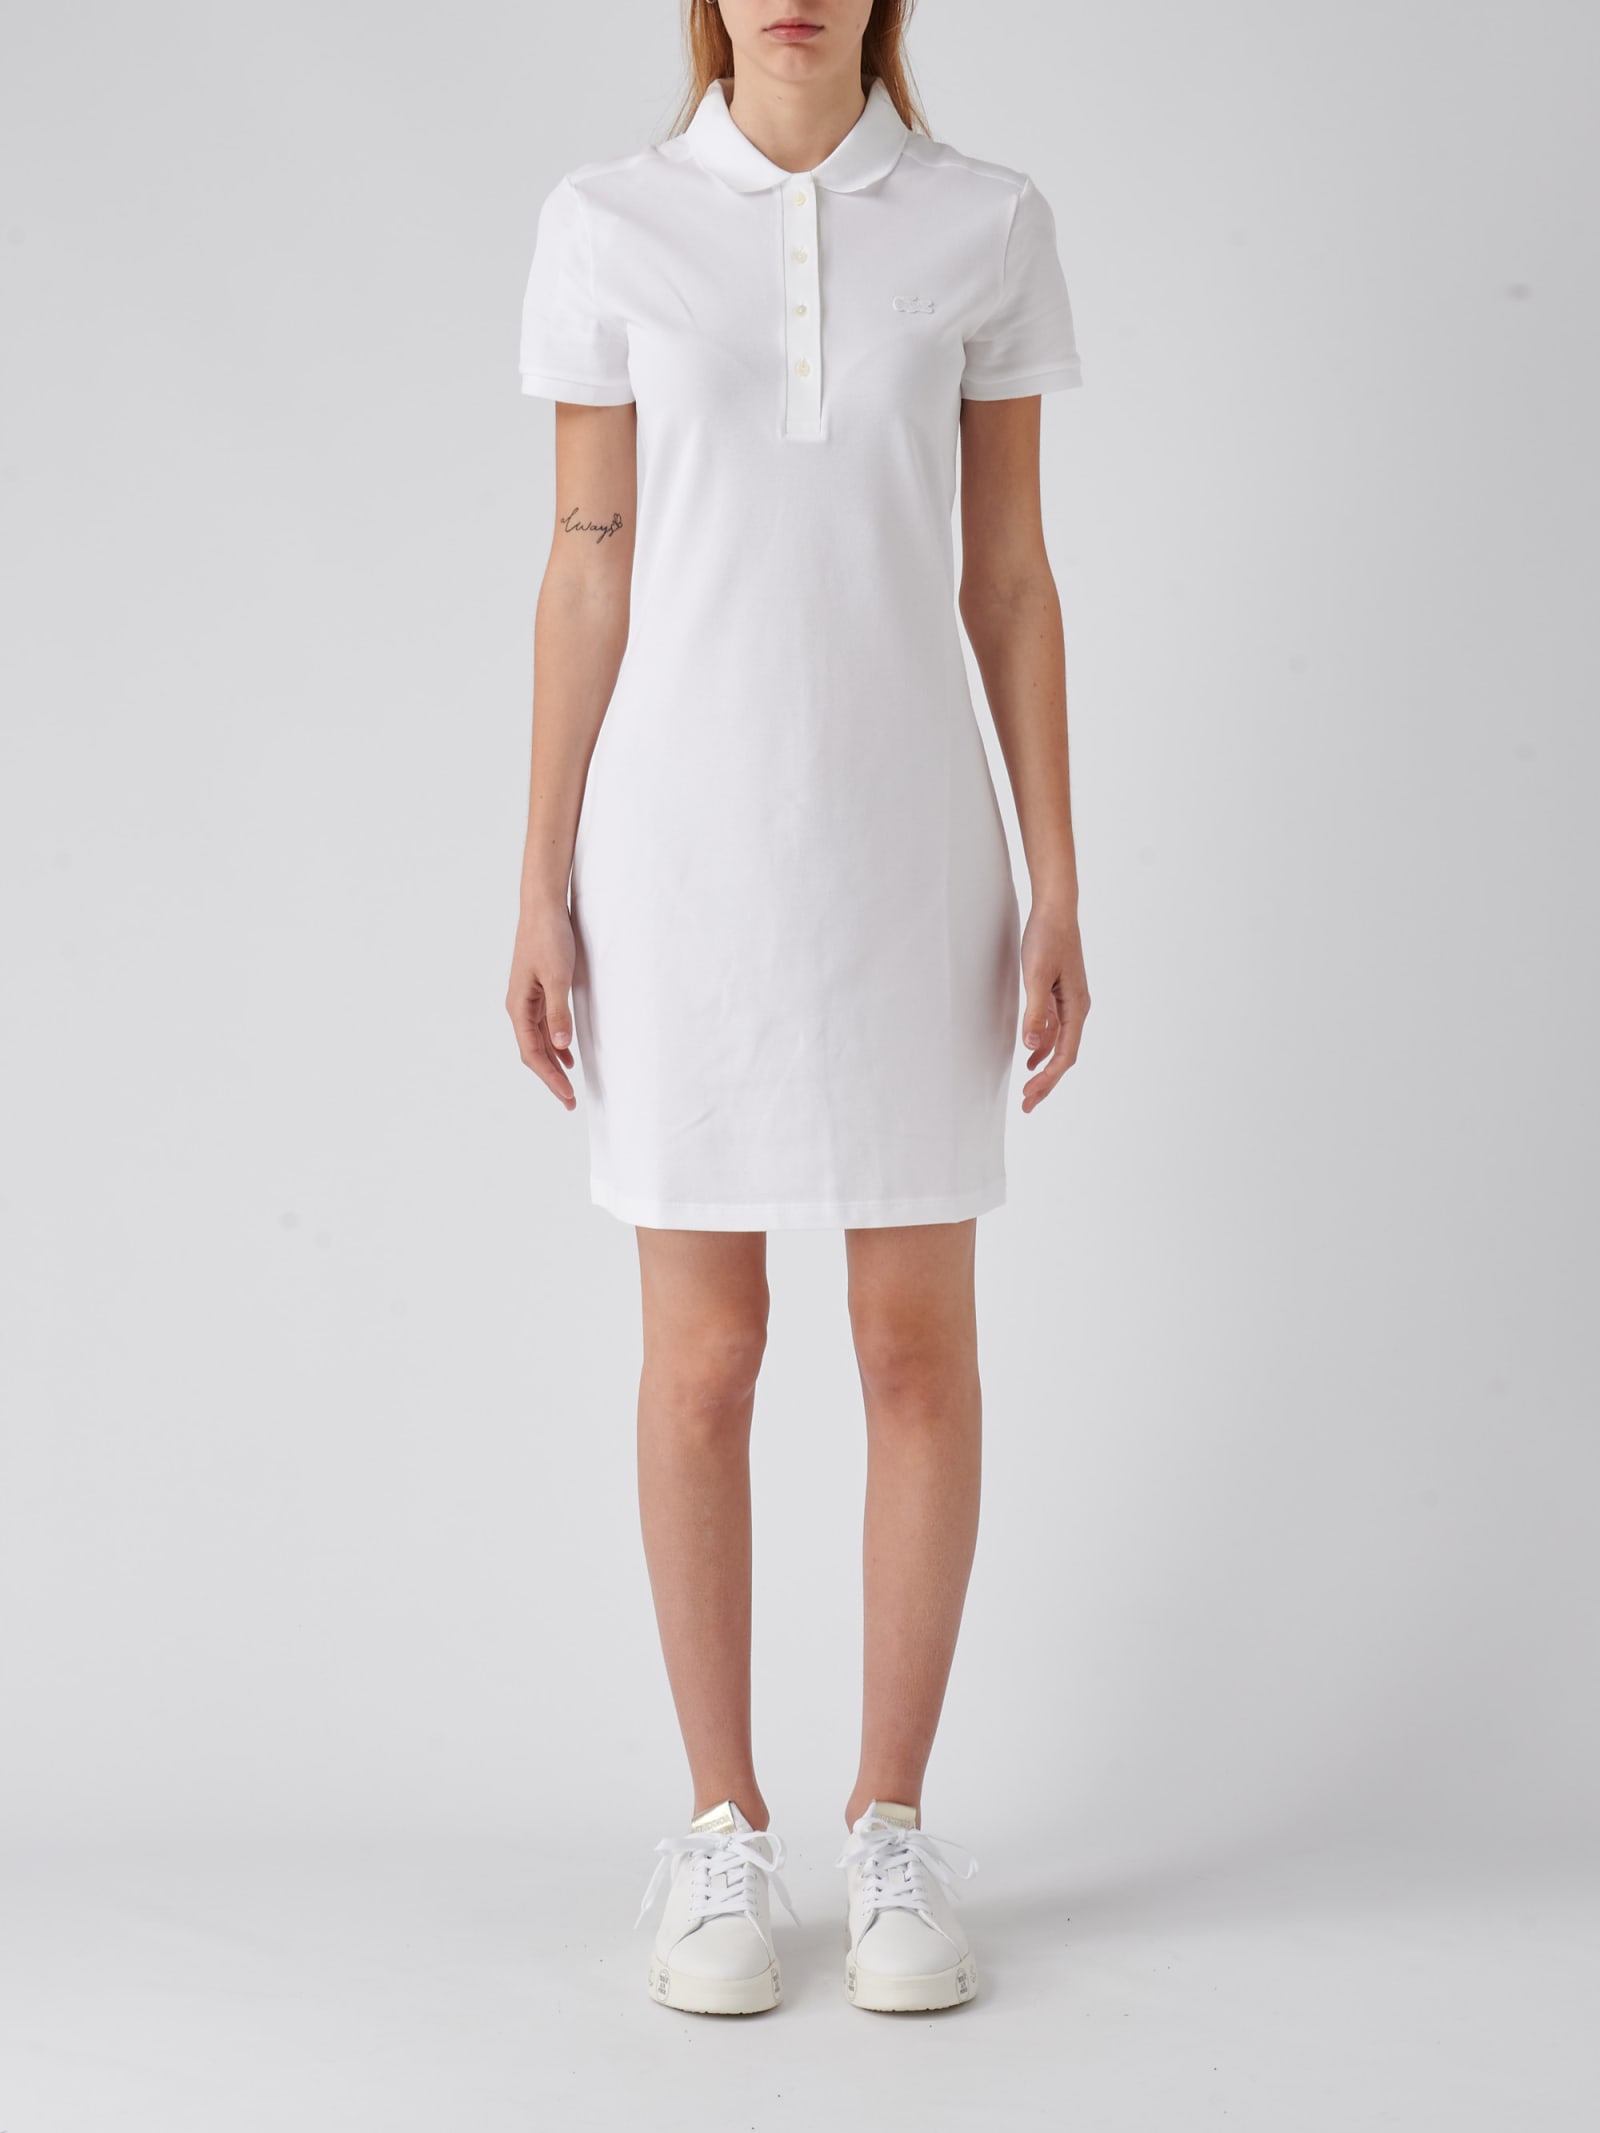 Lacoste Cotton Dress In Bianco